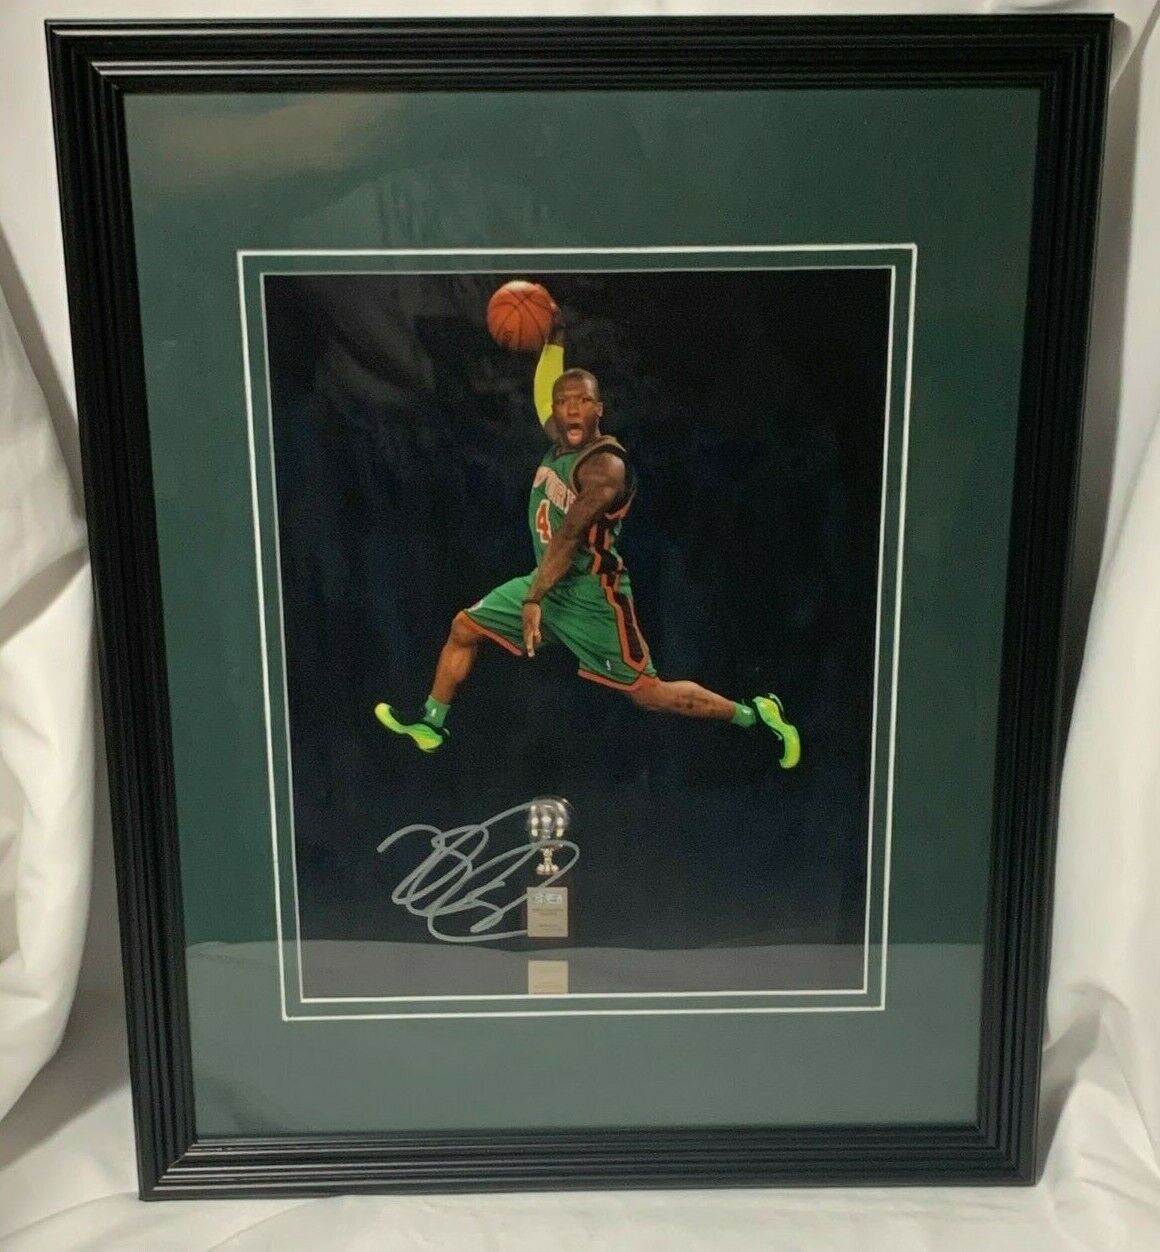 Nate Robinson Signed Photo 8x10 Framed Matted